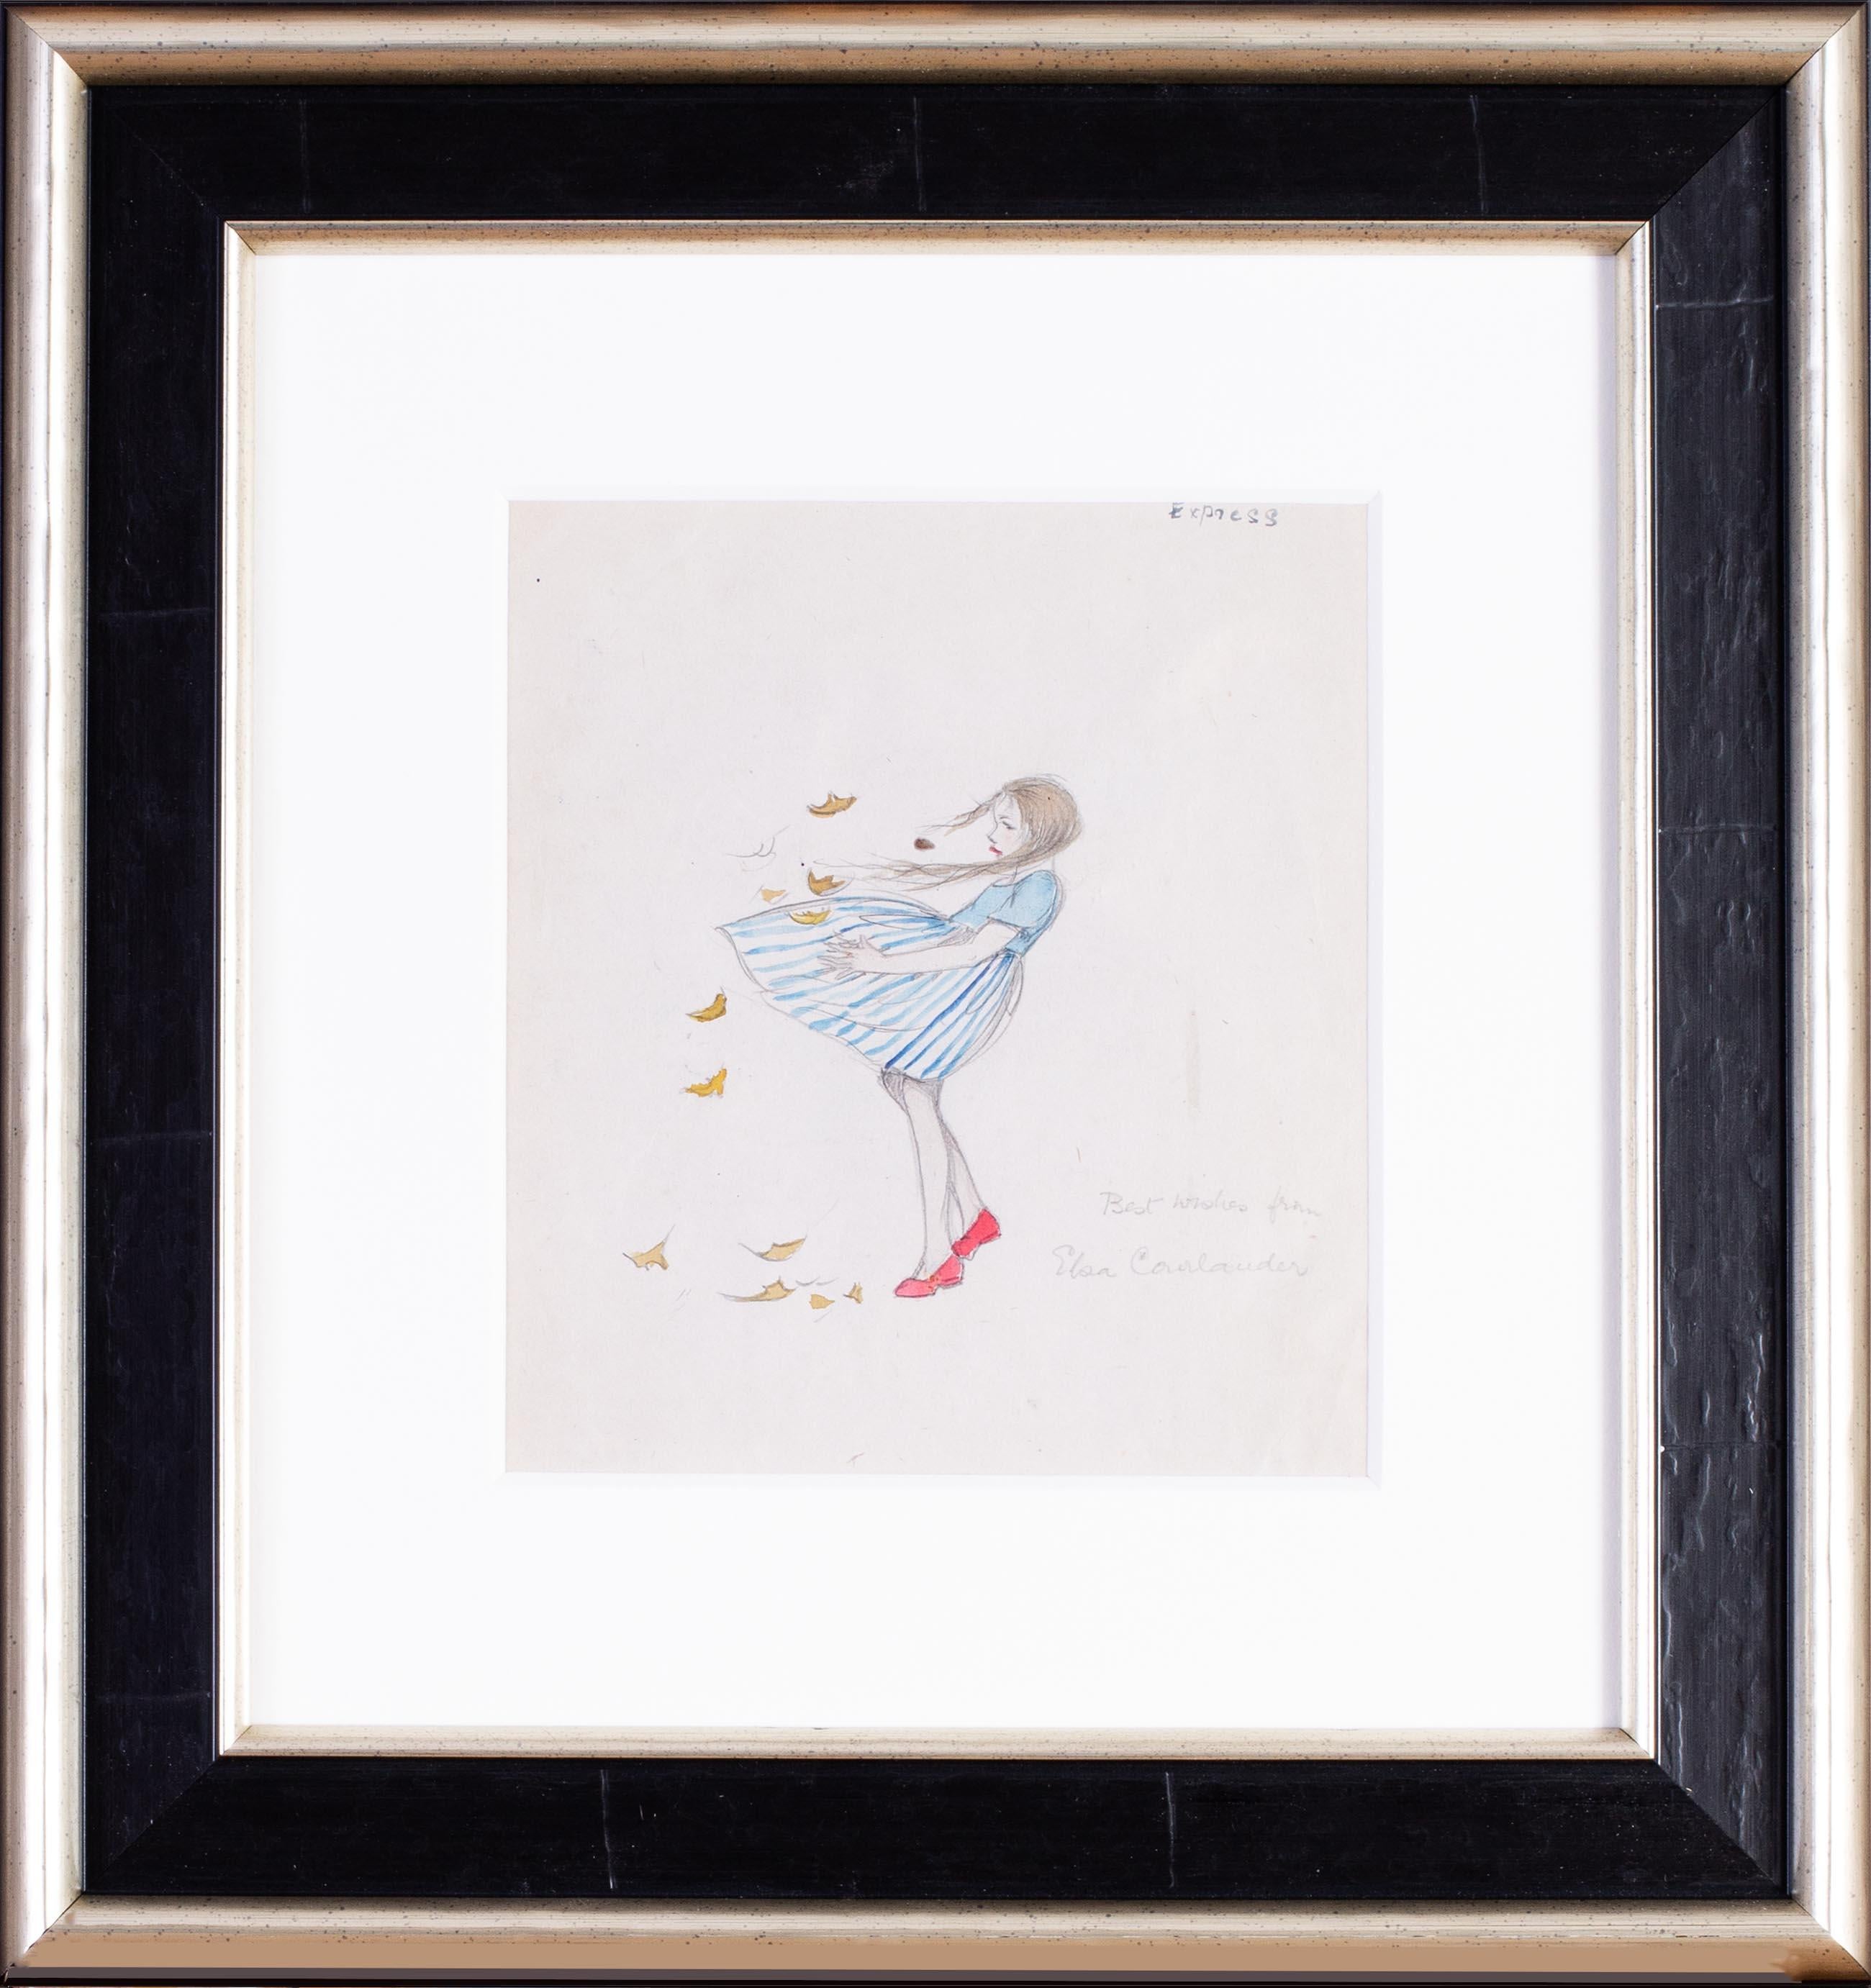 Elsa Carlander Figurative Art - A 1930s drawing of a young girl in a blustery windy day with autumn leaves